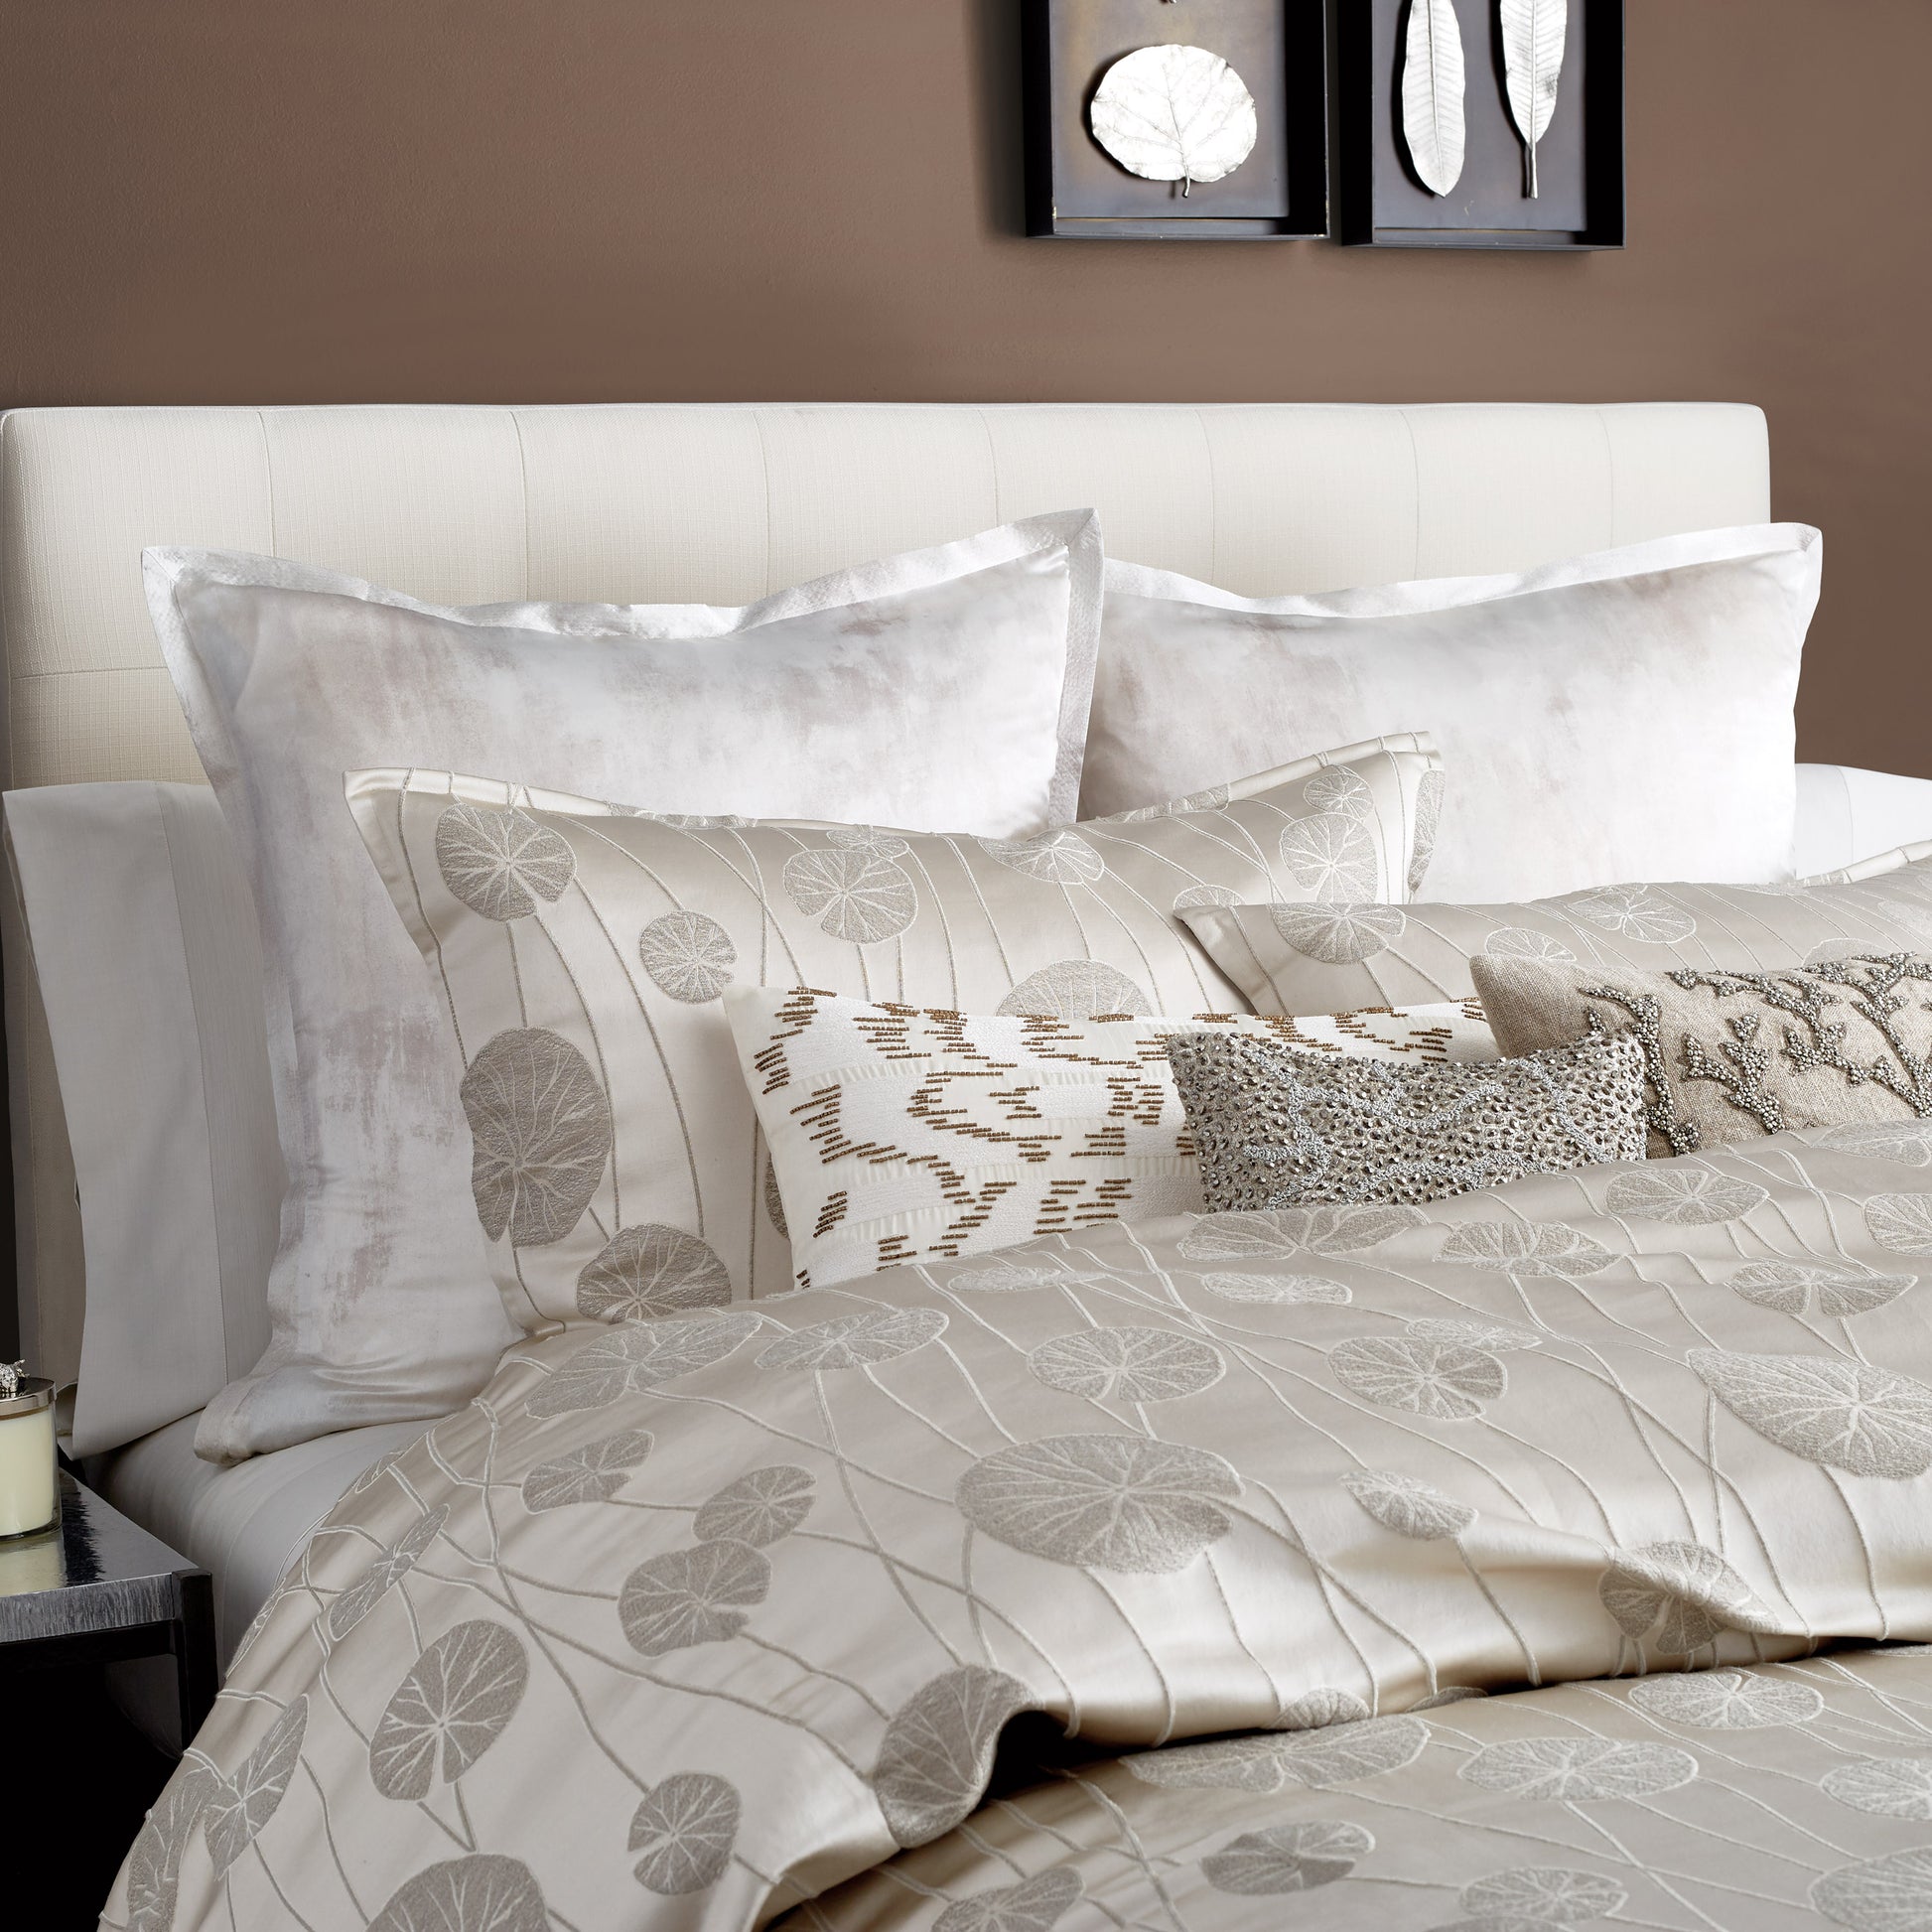 Michael Aram Lily Pad Bedding Collection